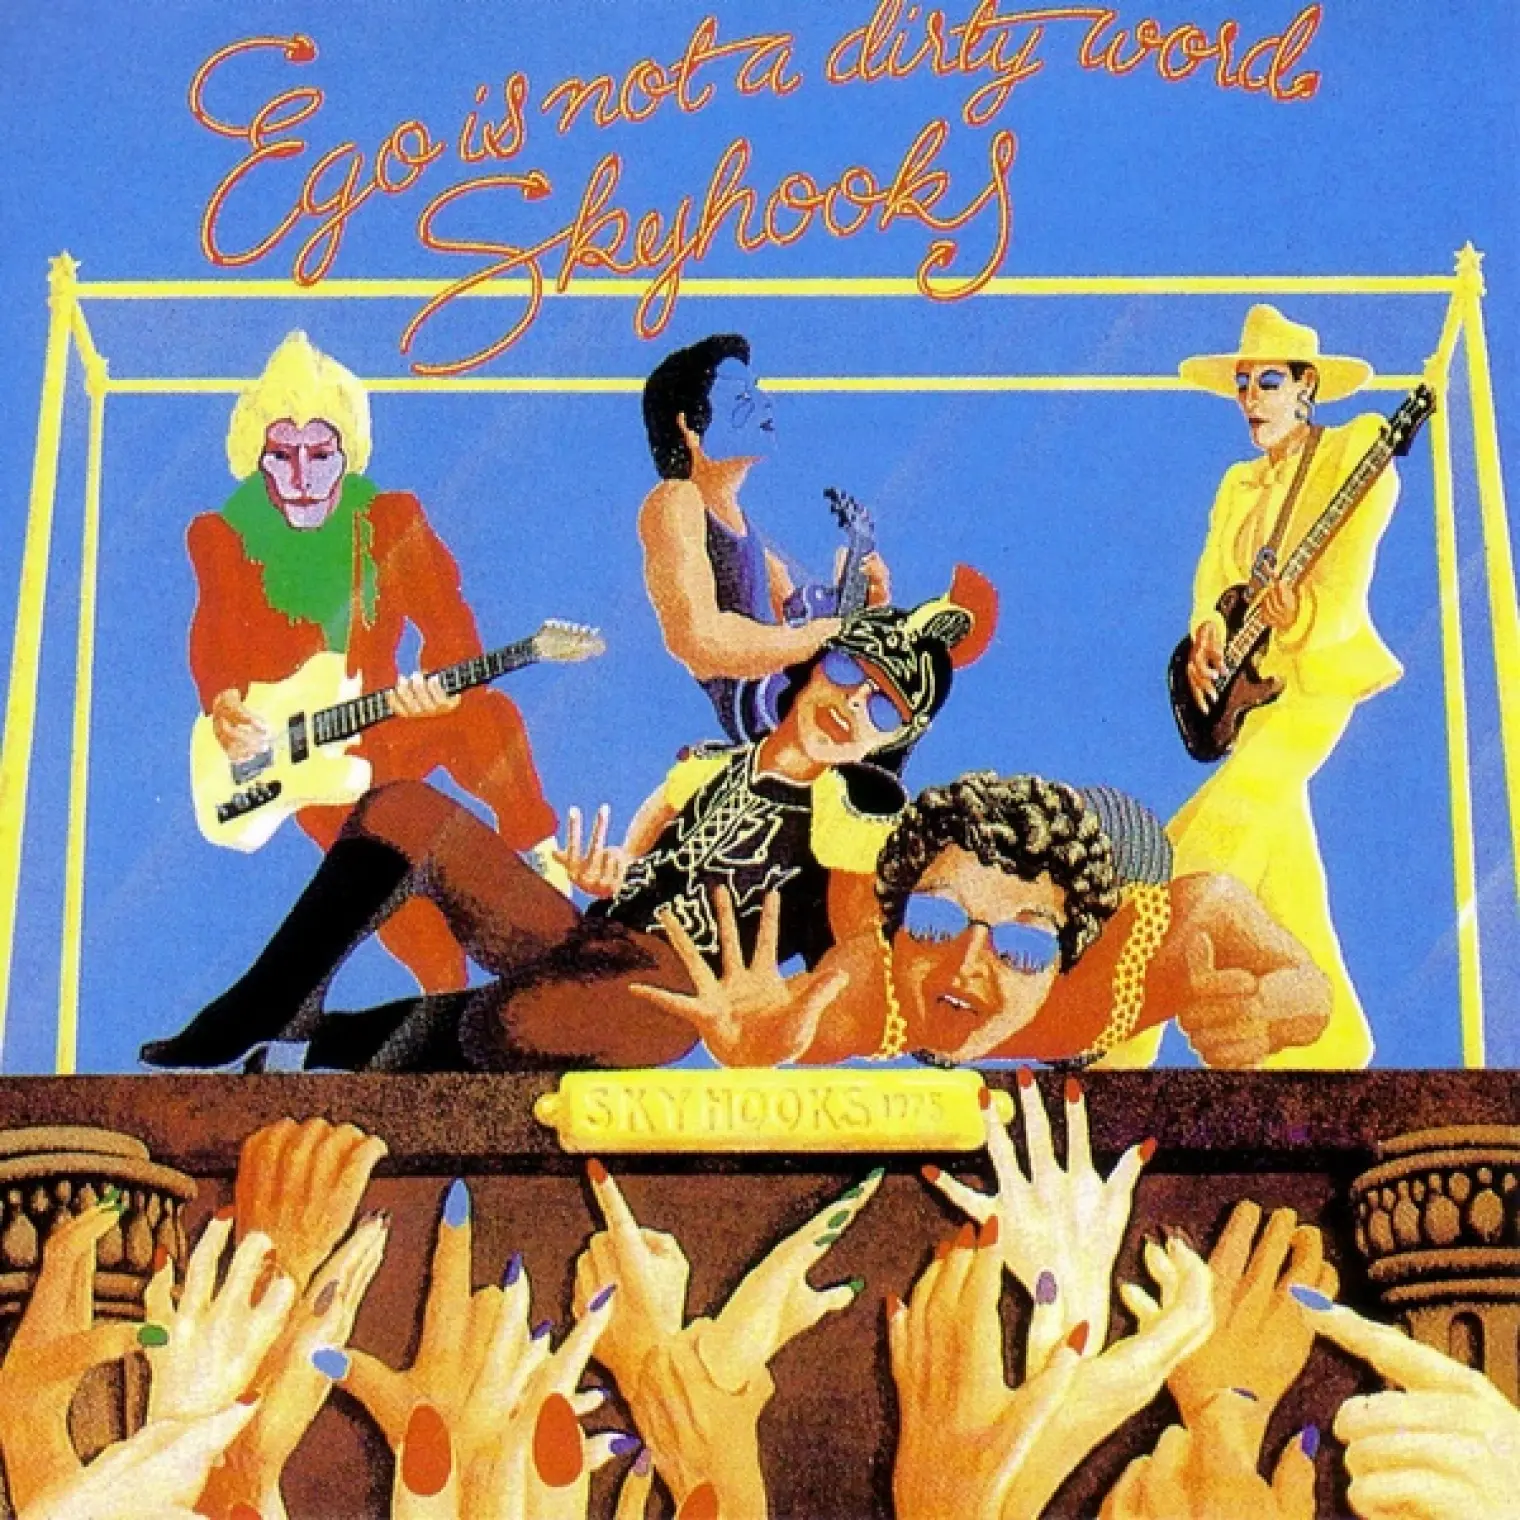 Ego Is Not A Dirty Word [remastered] -  Skyhooks 